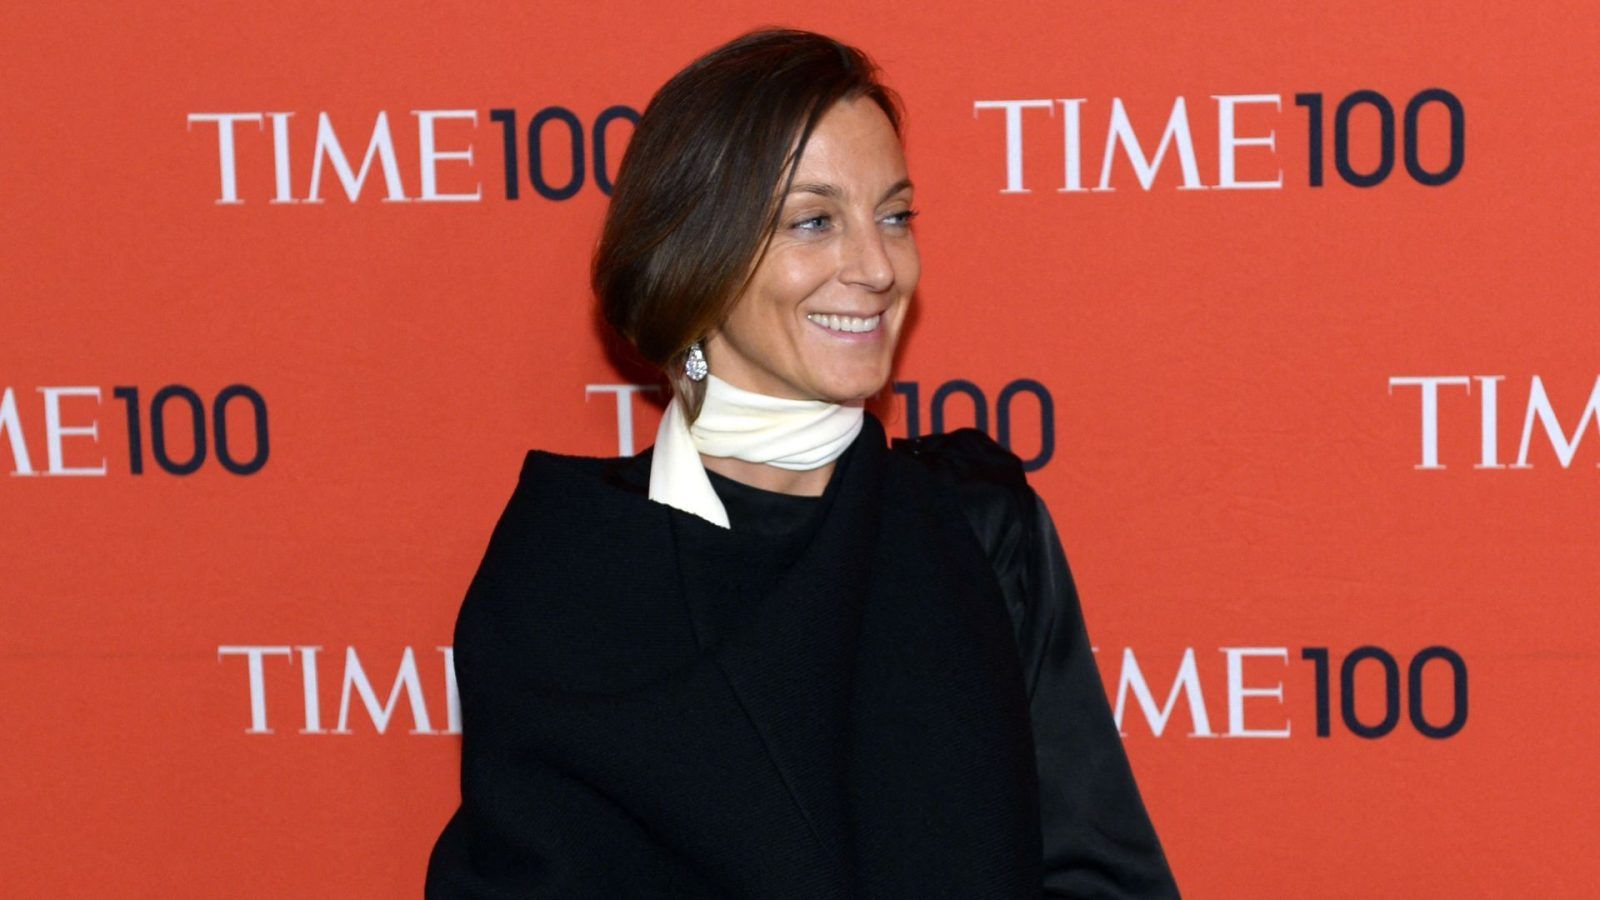 LING WU Bags - Phoebe Philo in her roughly 10 years at its helm